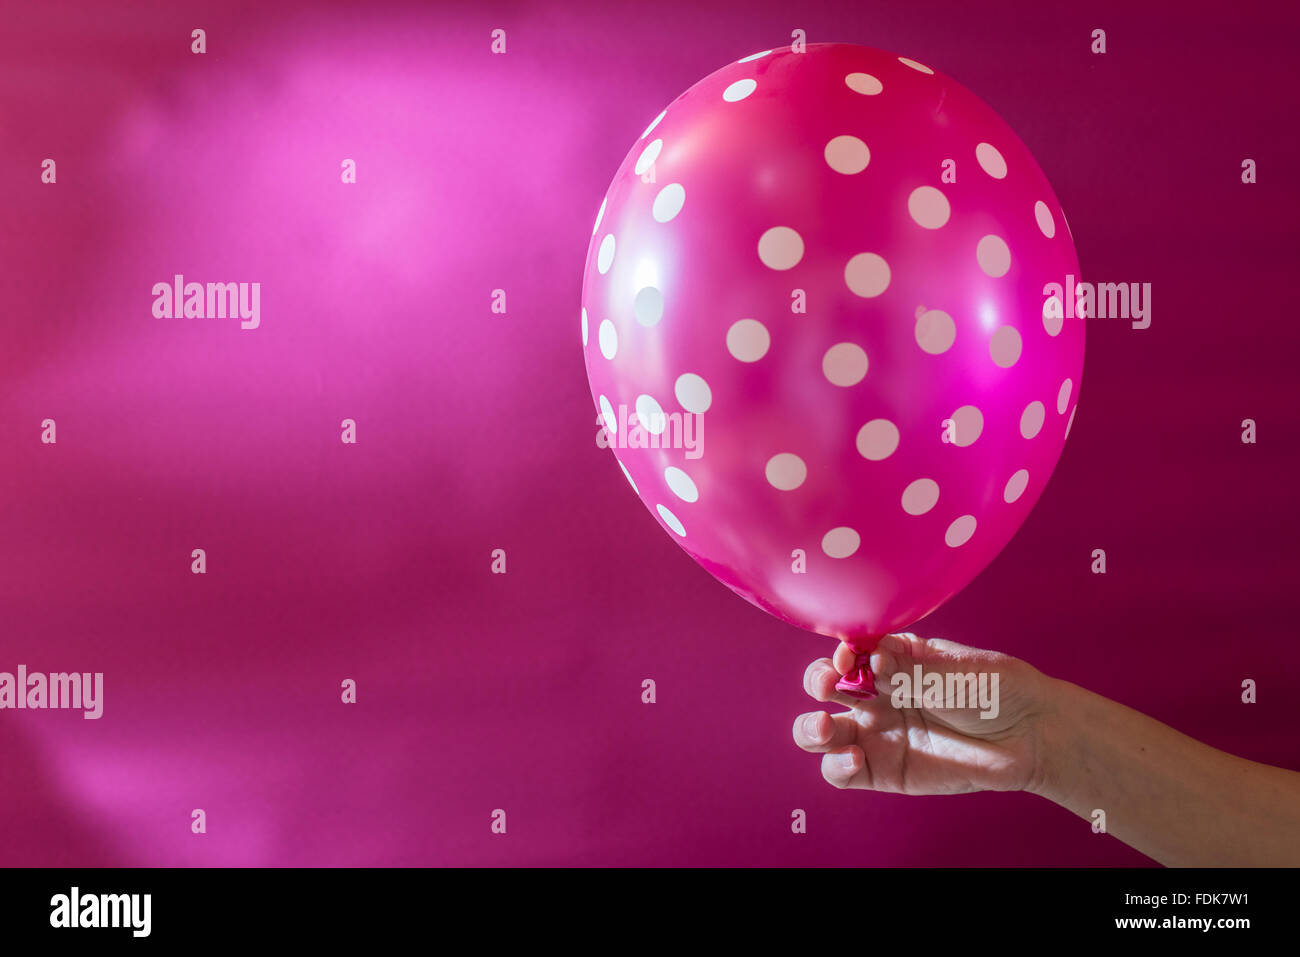 Hand holding pink balloon with white polka dots Stock Photo